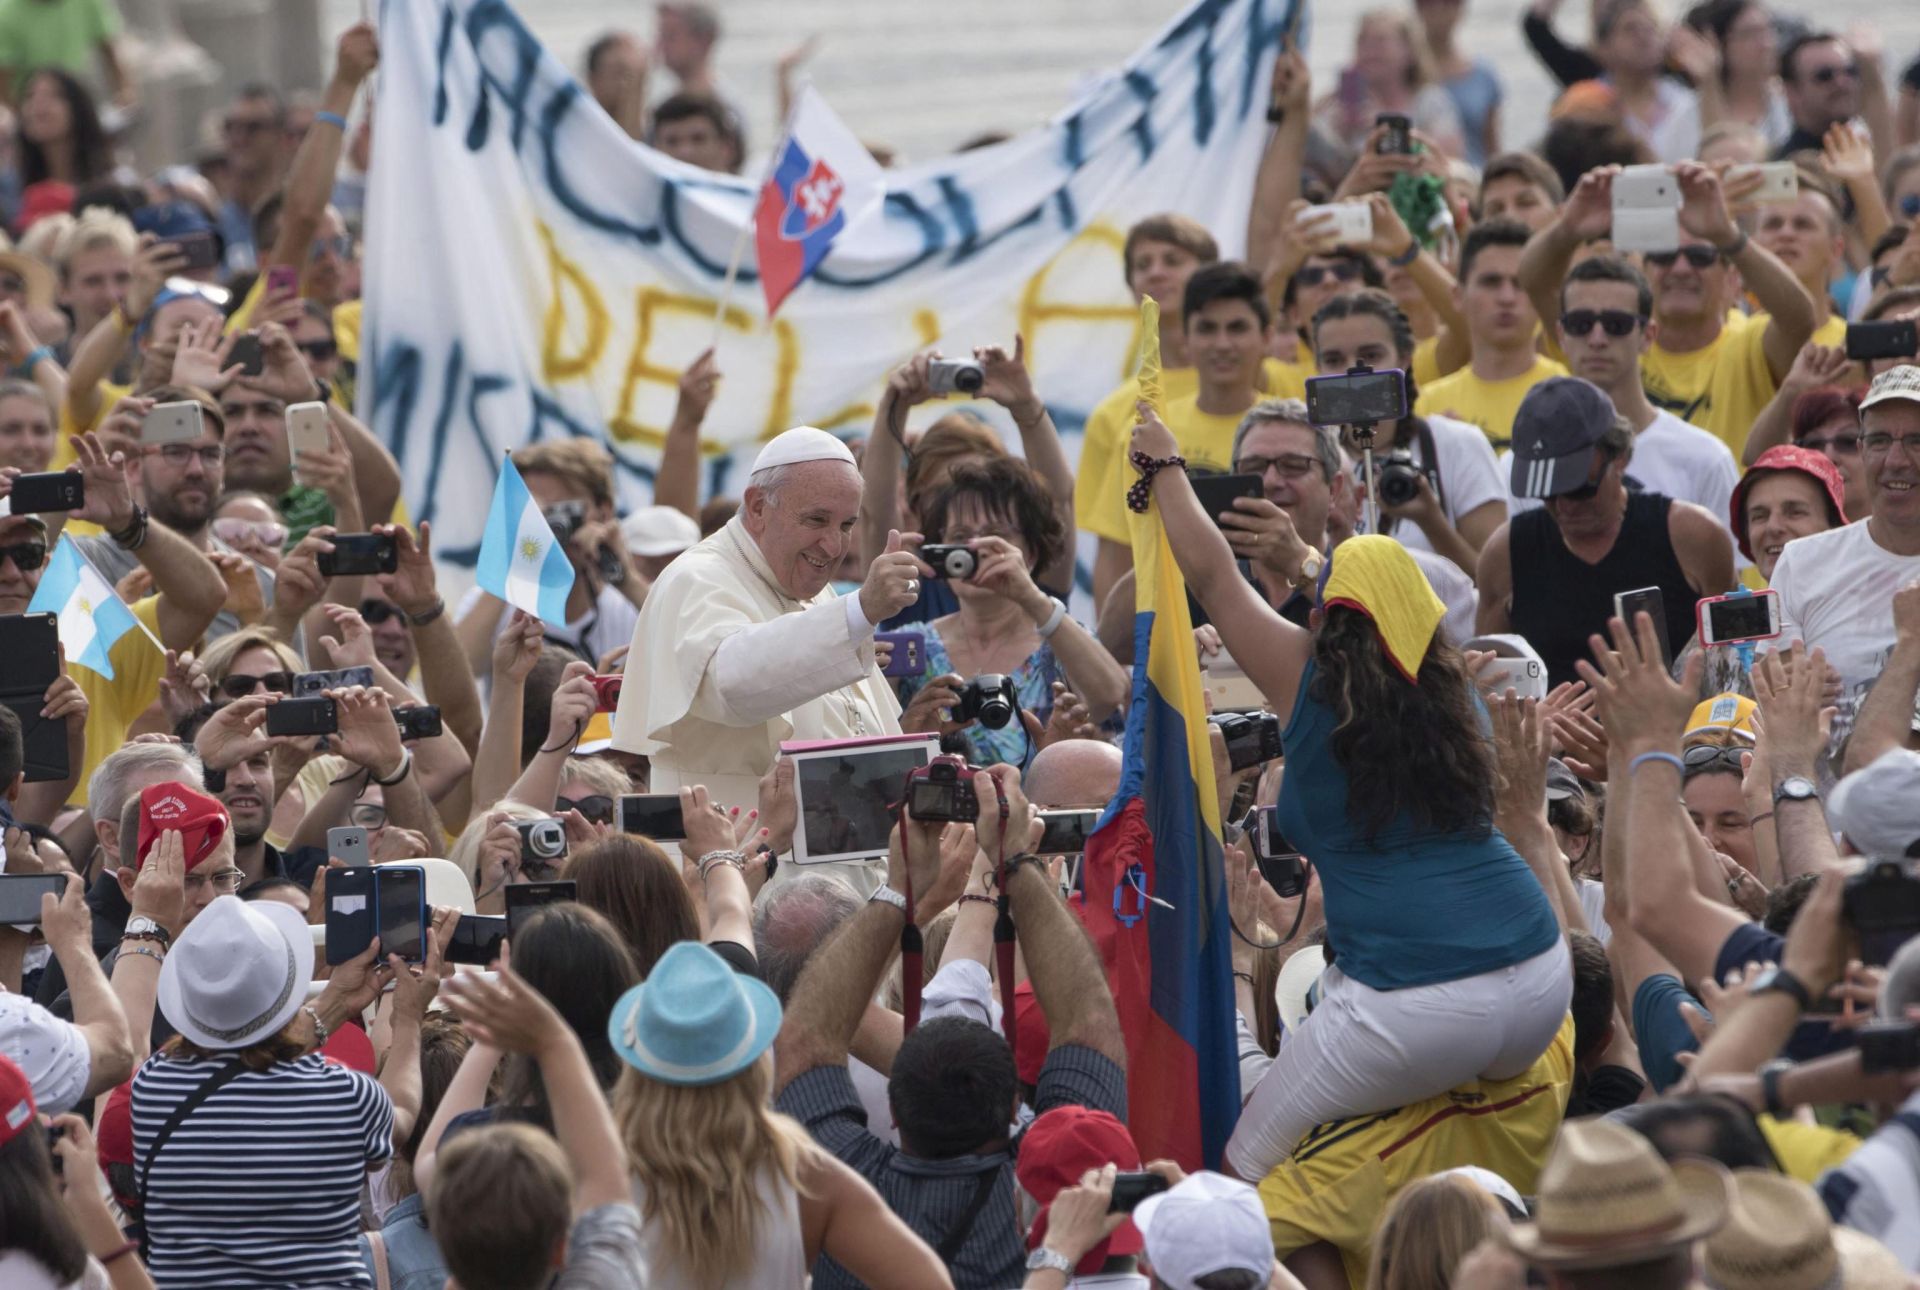 epa05516376 Pope Francis surrounded by a sea of welcoming pilgrims and tourist as he arrives for his weekly general audience in St. Peter's Square, Vatican City, 31 August 2016.  EPA/Giorgio Onorati